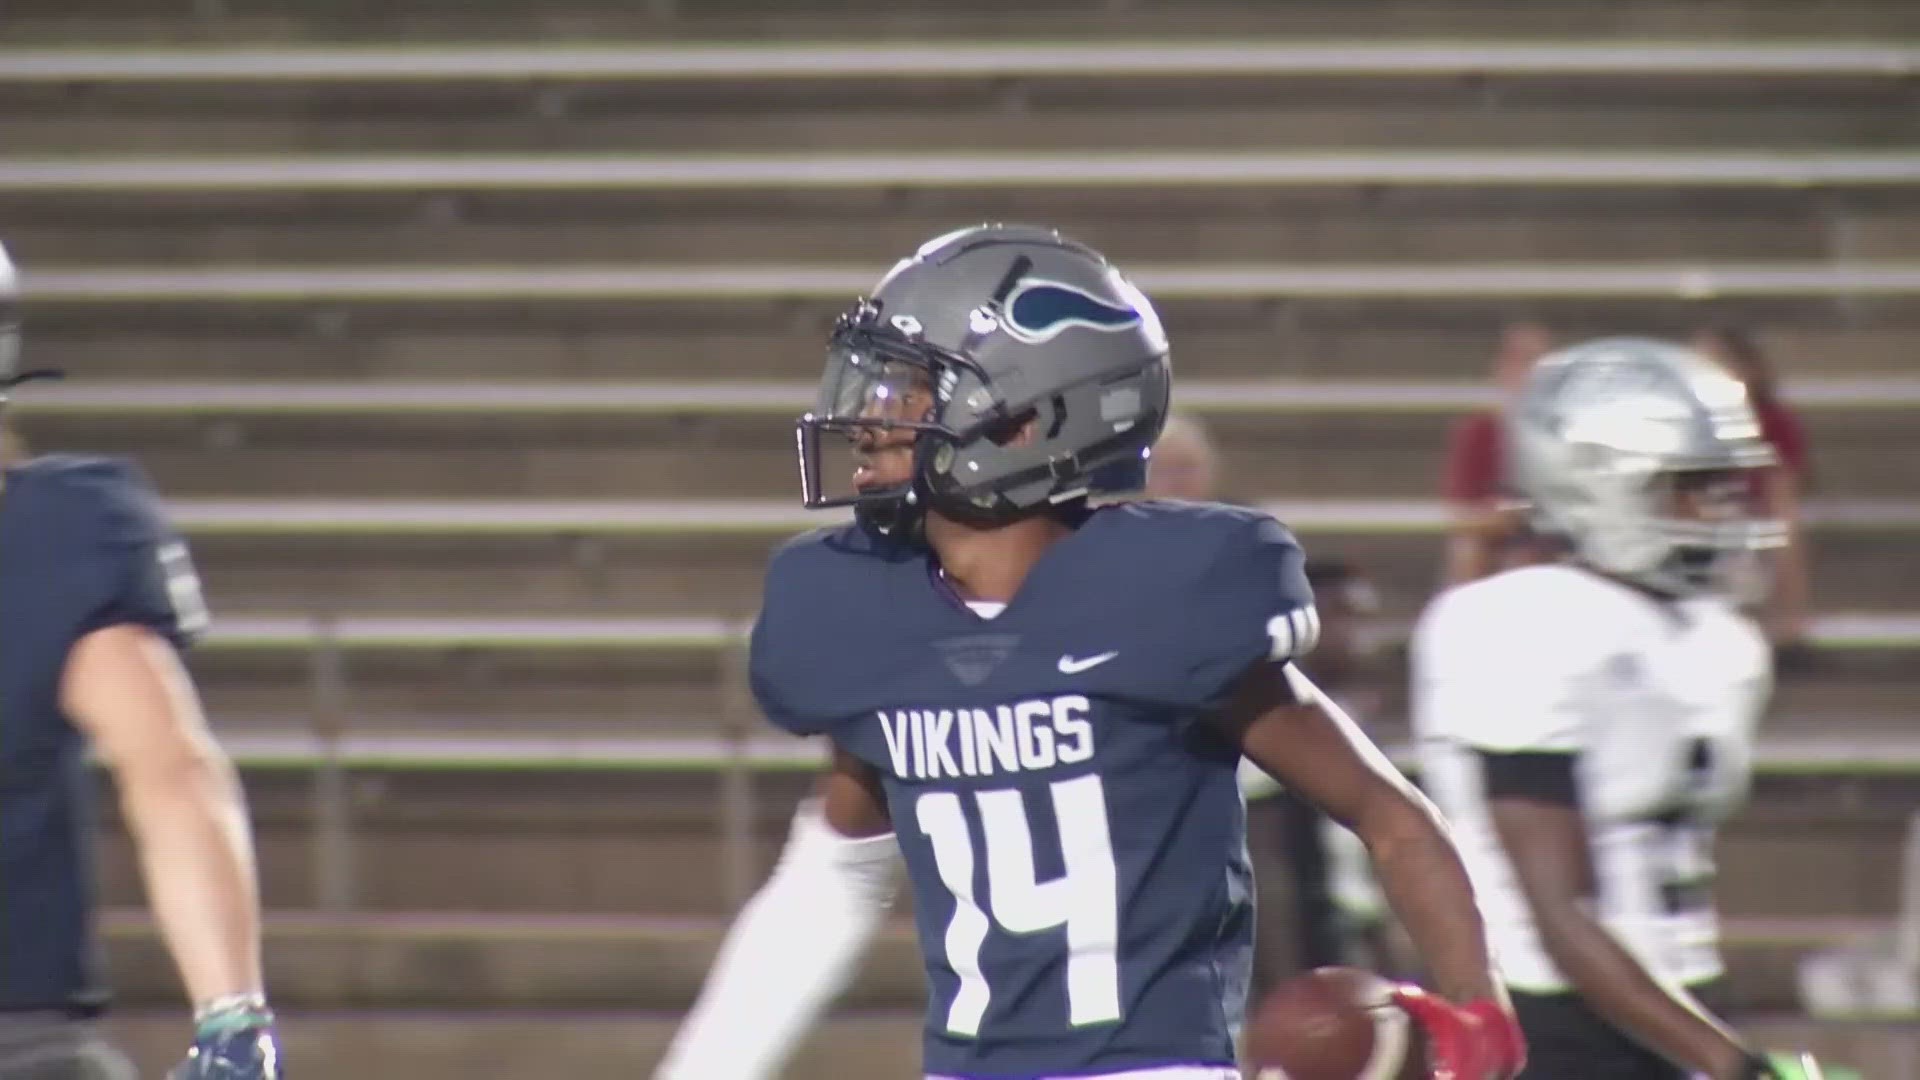 The Bryan High School Junior plays for his mom and gives it his all on the football field.